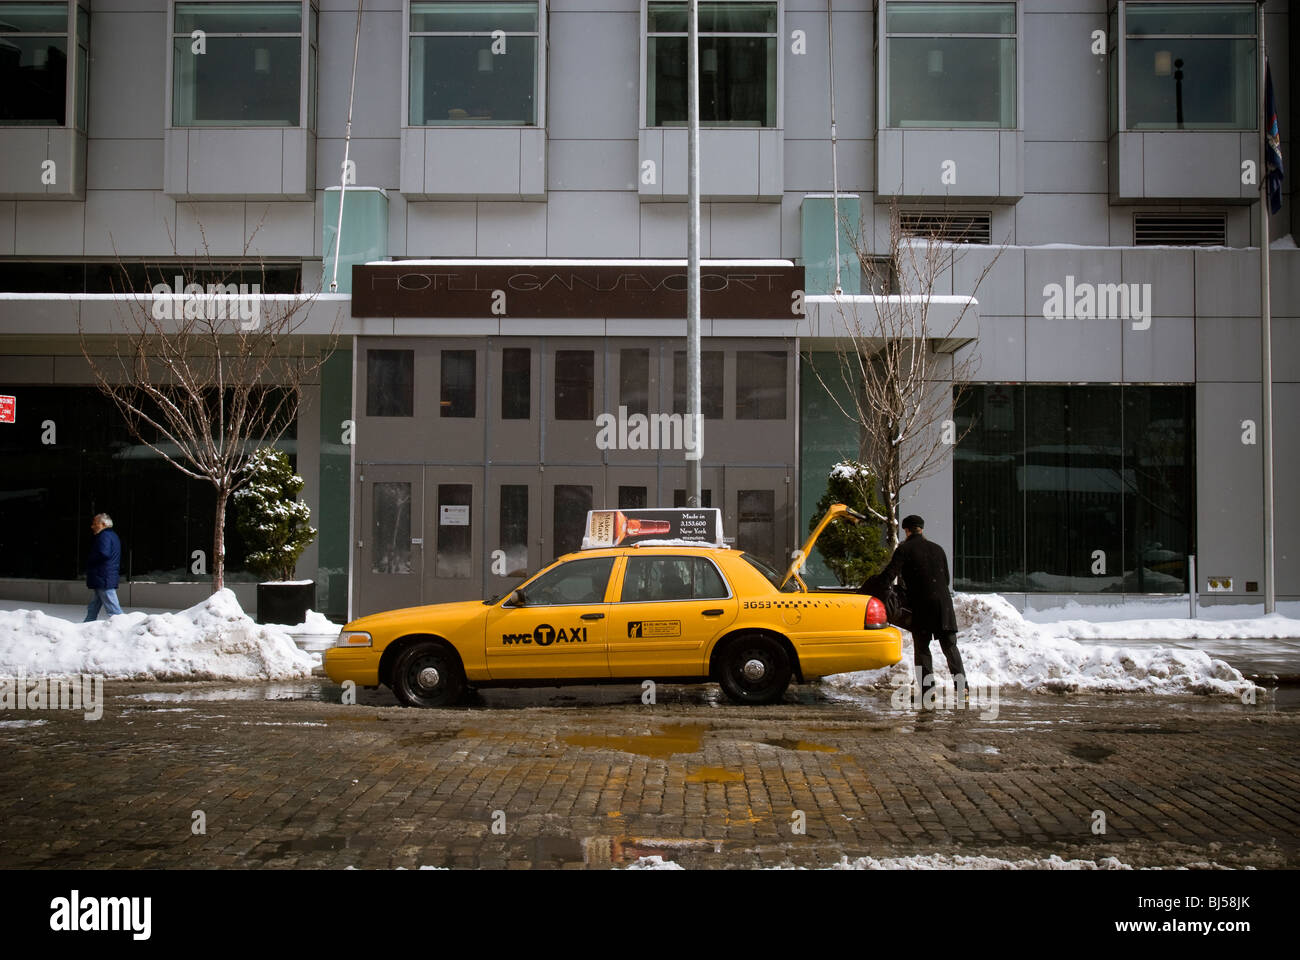 Taxis at work in front of the Hotel Gansevoort in the trendy Meatpacking District in New York Stock Photo